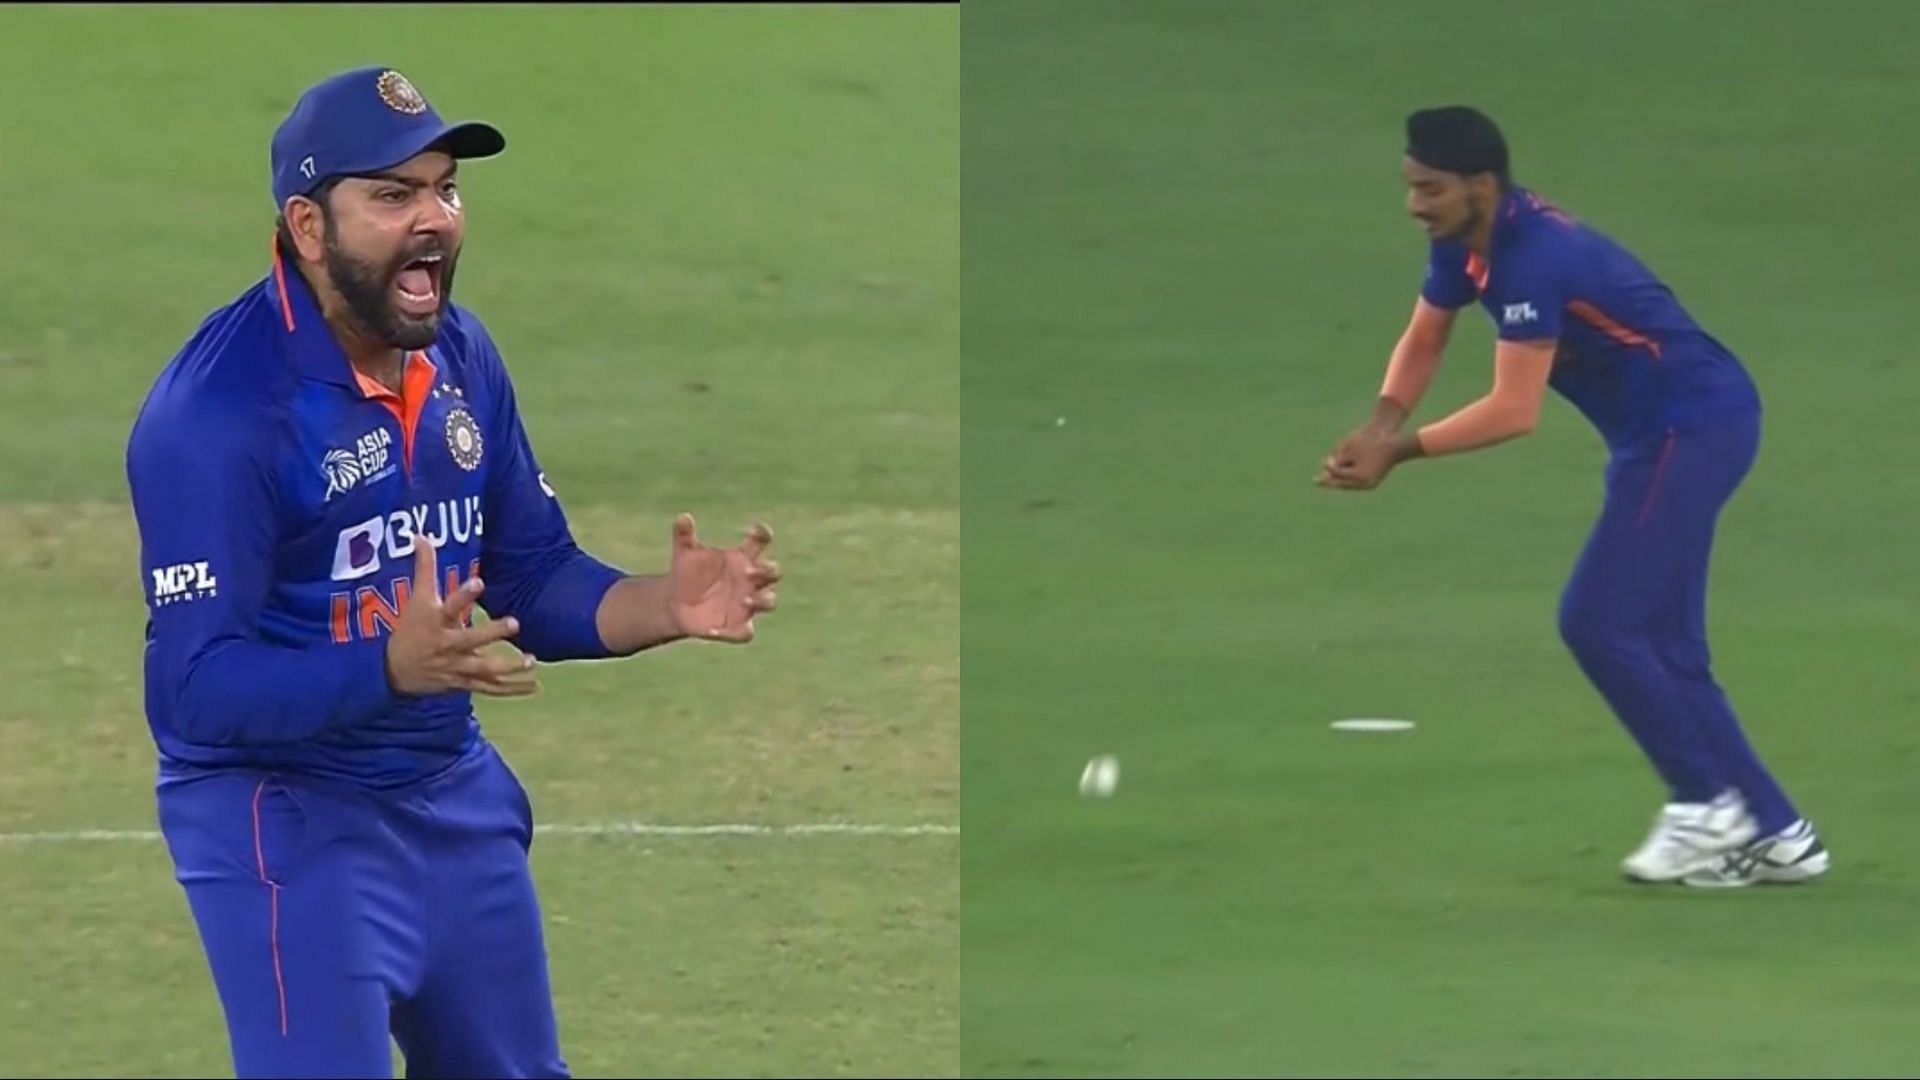 Rohit Sharma reacts after Arshdeep Singh drops a catch during the Asia Cup.